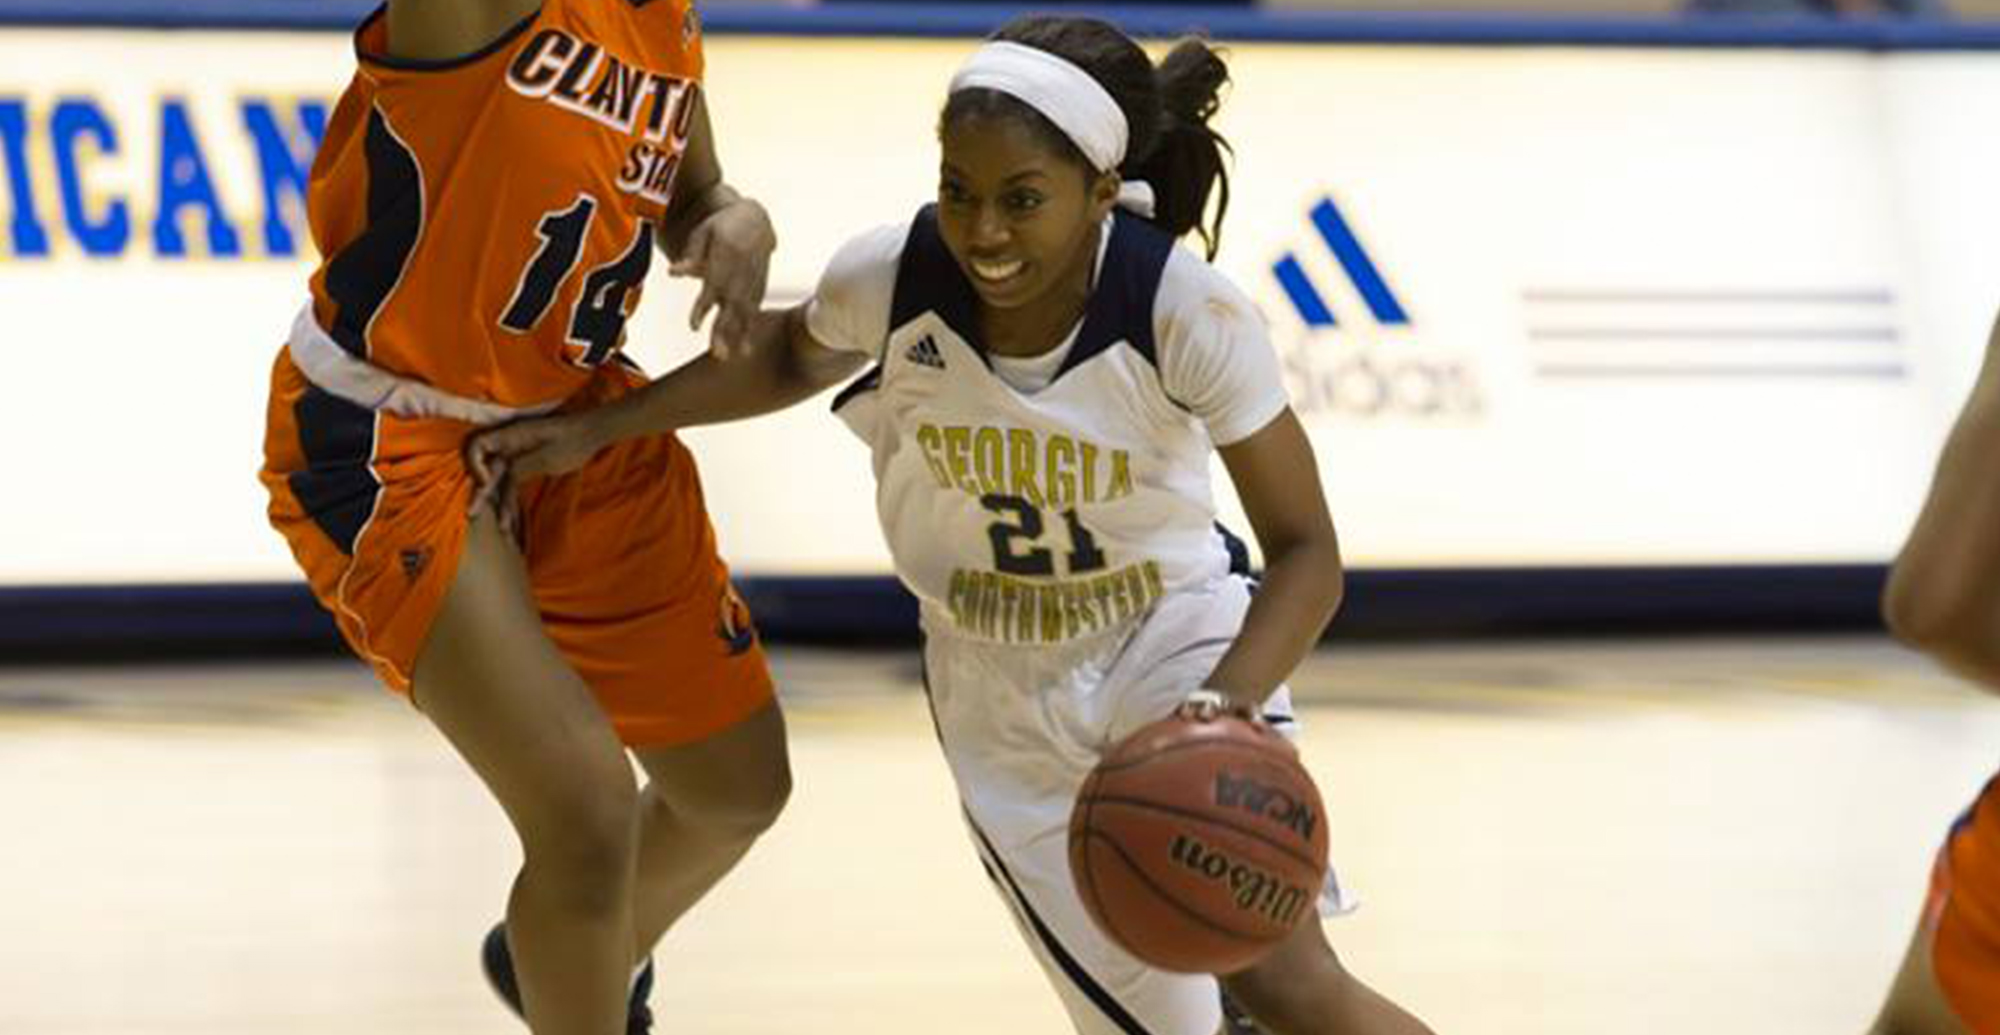 Weekend Recap: Lady Canes Steal One Game at Southeast Region Crossover